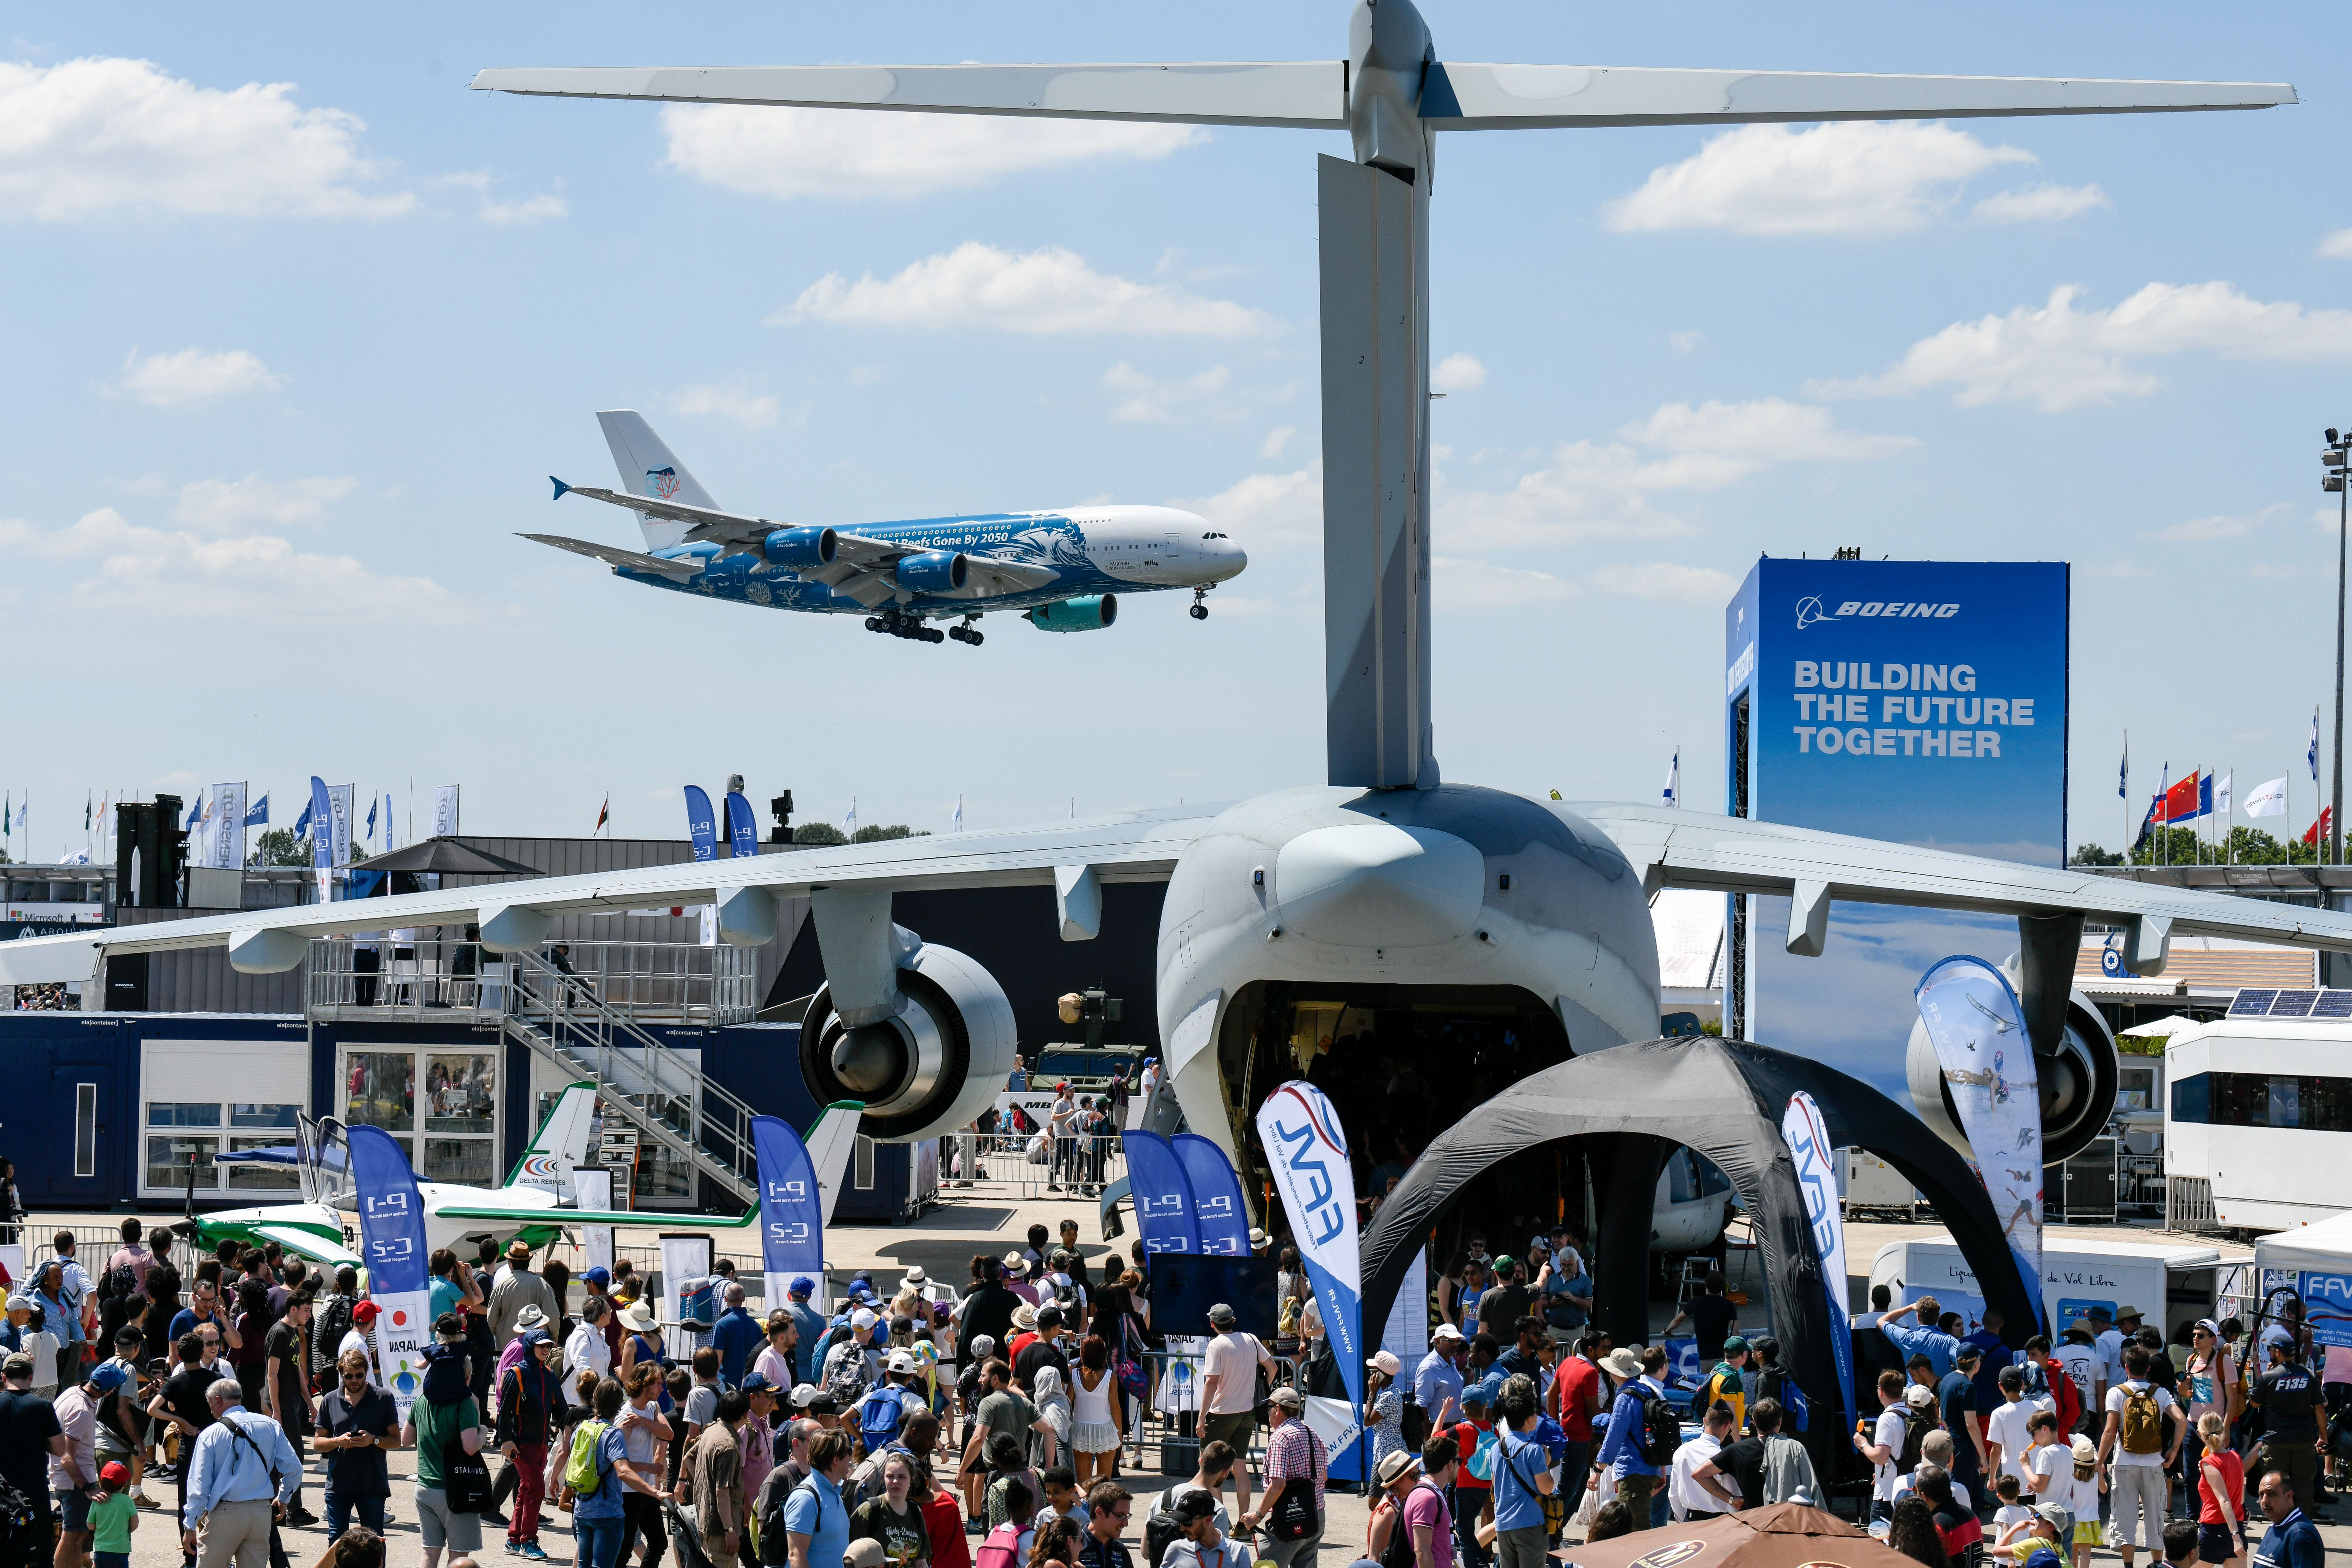 A photo shows crowds at the 2019 Paris Air Show watching the Airbus A380 flying past the Airbus A400M